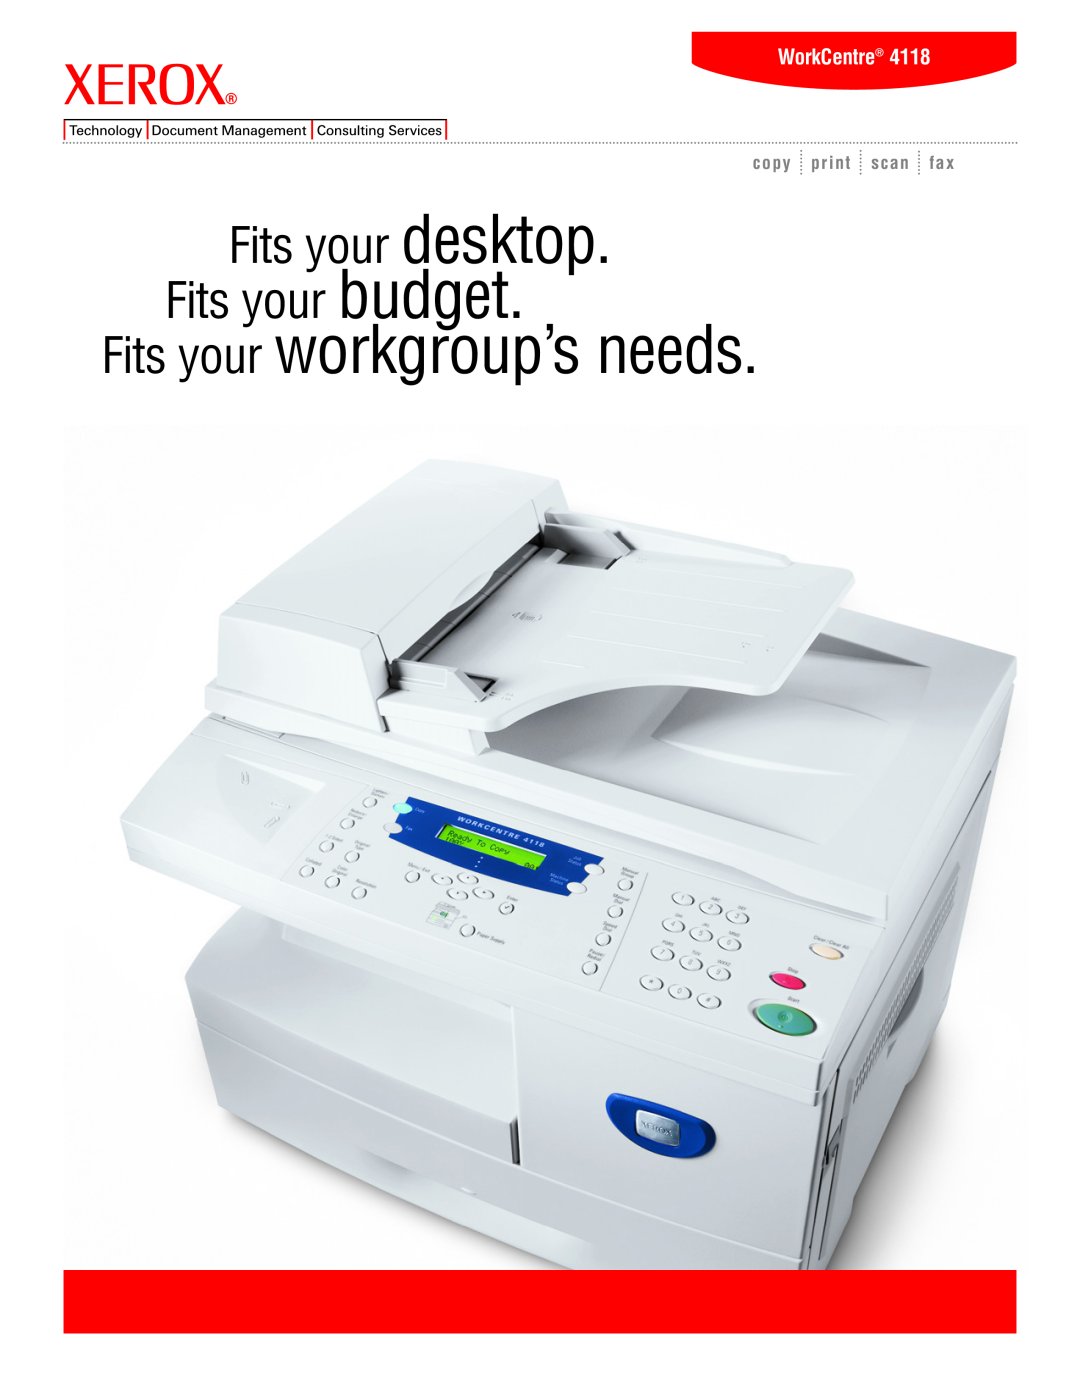 Xerox 4118 manual WorkCentre, Fits your workgroup’s needs, Fits your desktop Fits your budget, copy print scan fax 